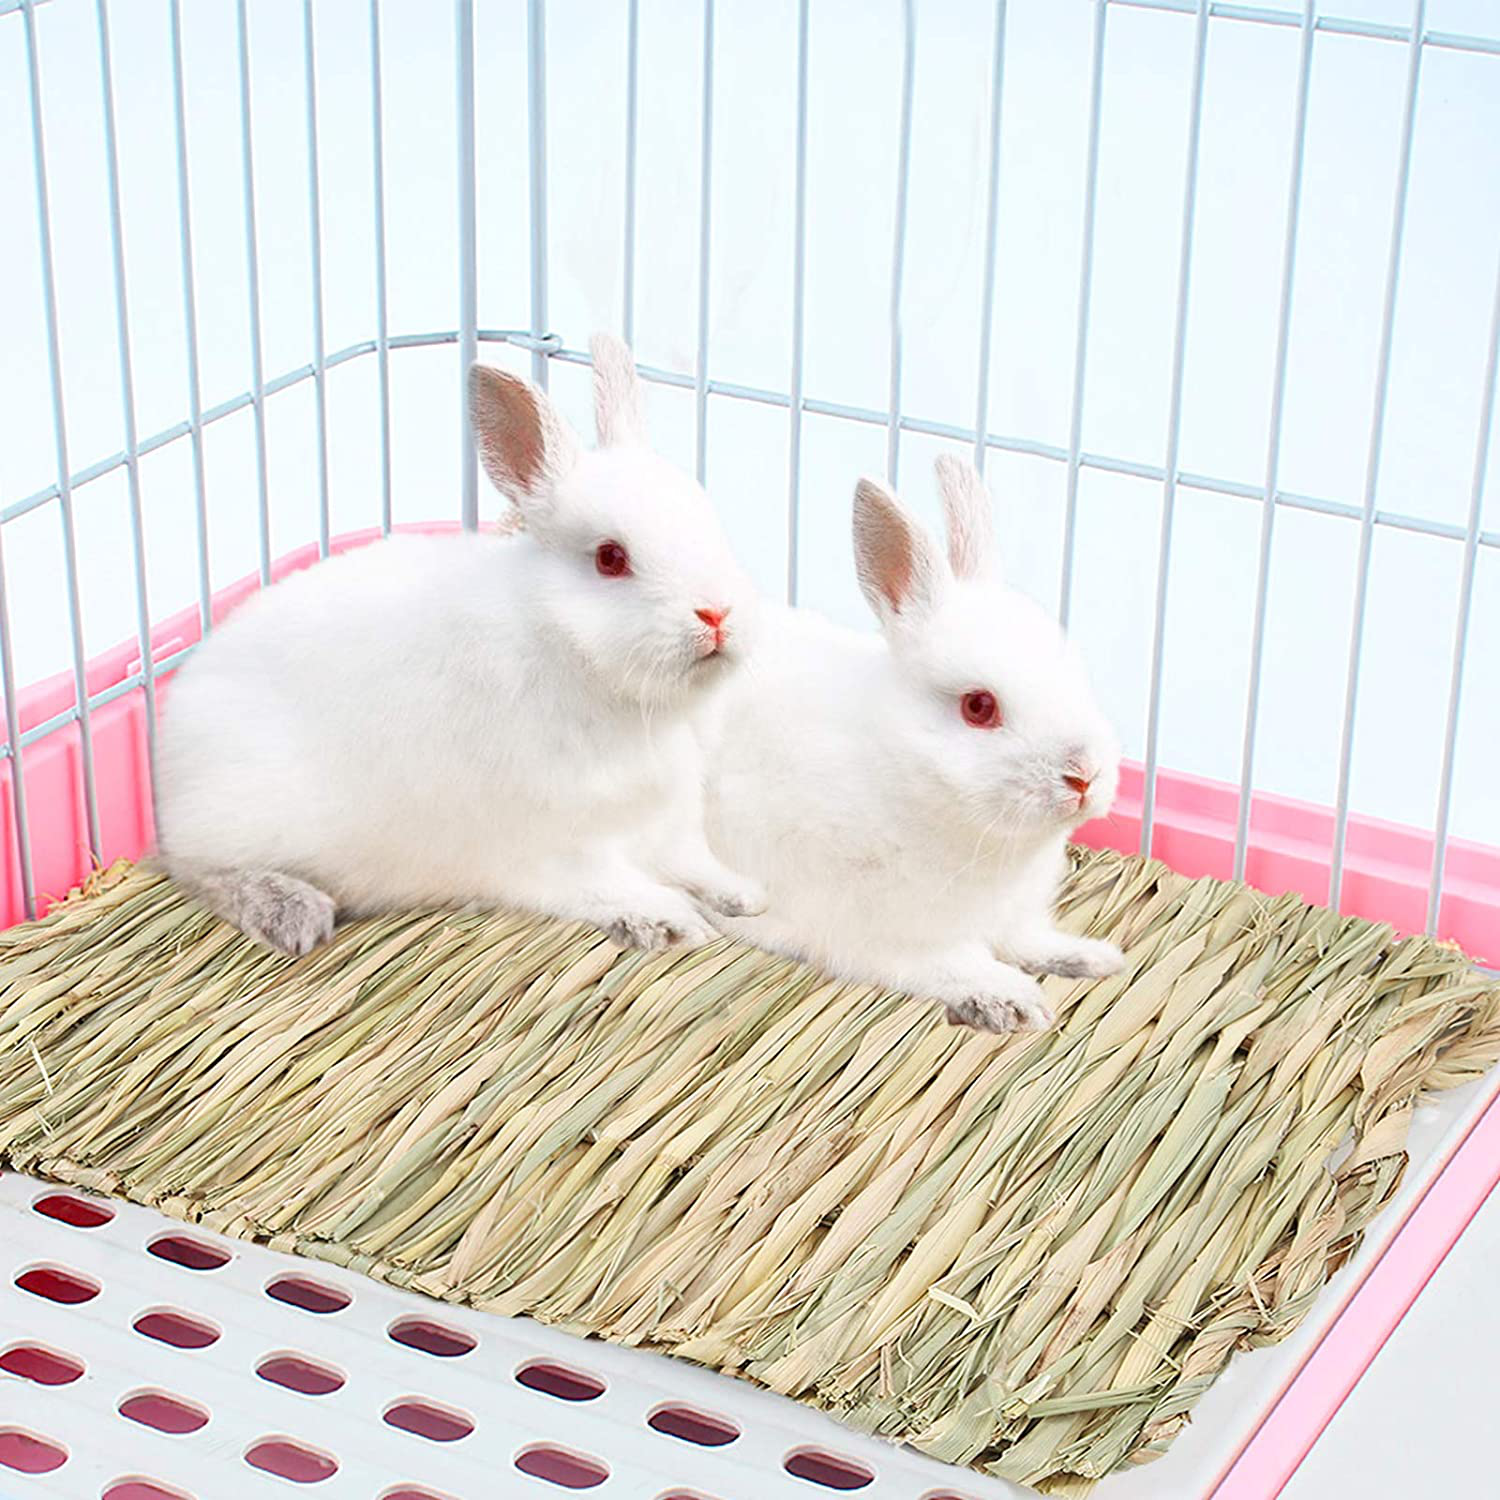 Anyuxin Rabbit Grass Mat - Woven Bed Mat, Bunny Bedding for Small Animals, Natural Straw Woven Bed for Pet Nesting, Nature Hay Mat Chewing Play Toy for Guinea Pig, Hamster, Squirrel and More（3 Pack）